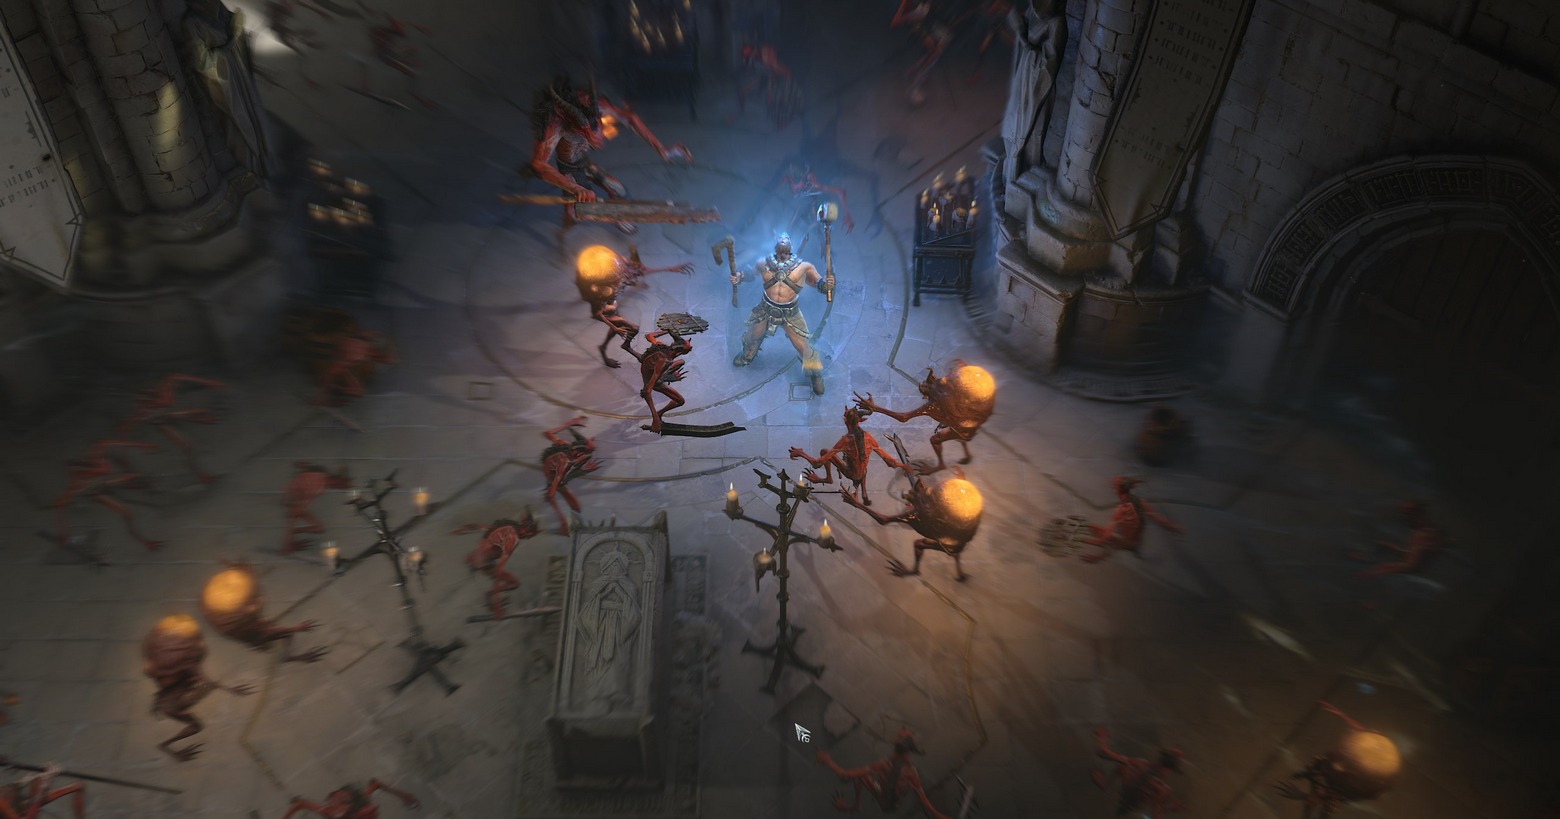 In the Sanctuary World, you also fight in temples, as seen here. The Diablo 4 map consists of five different zones.